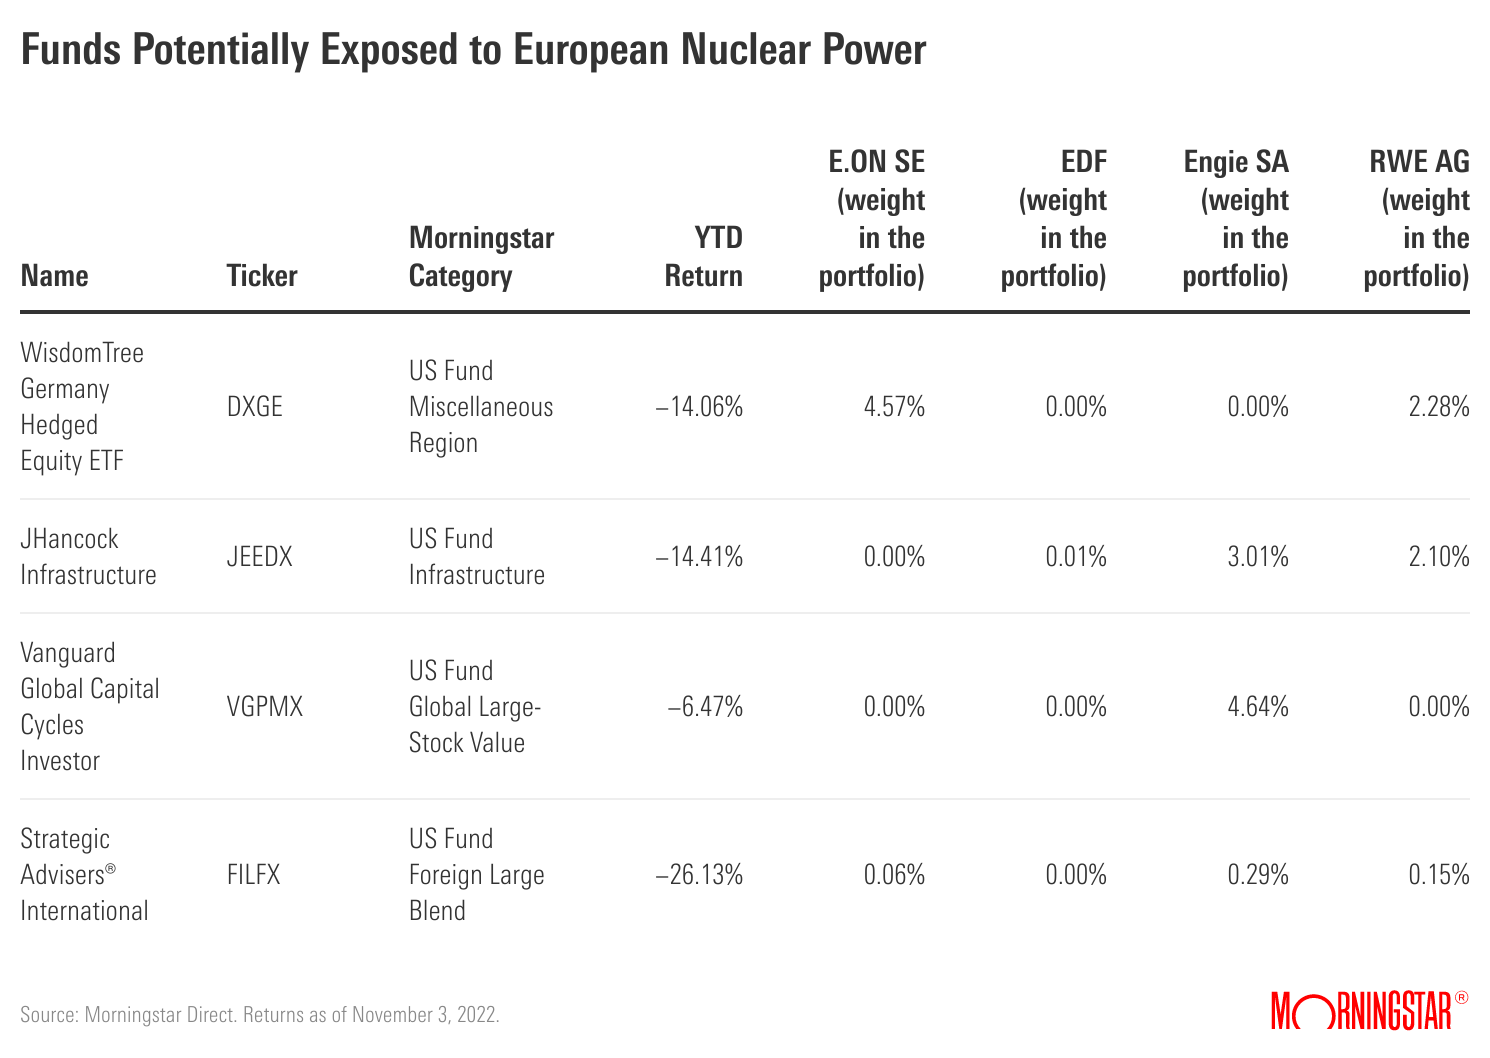 Table outlining four major funds that are potentially exposed to European nuclear power and to what extent.